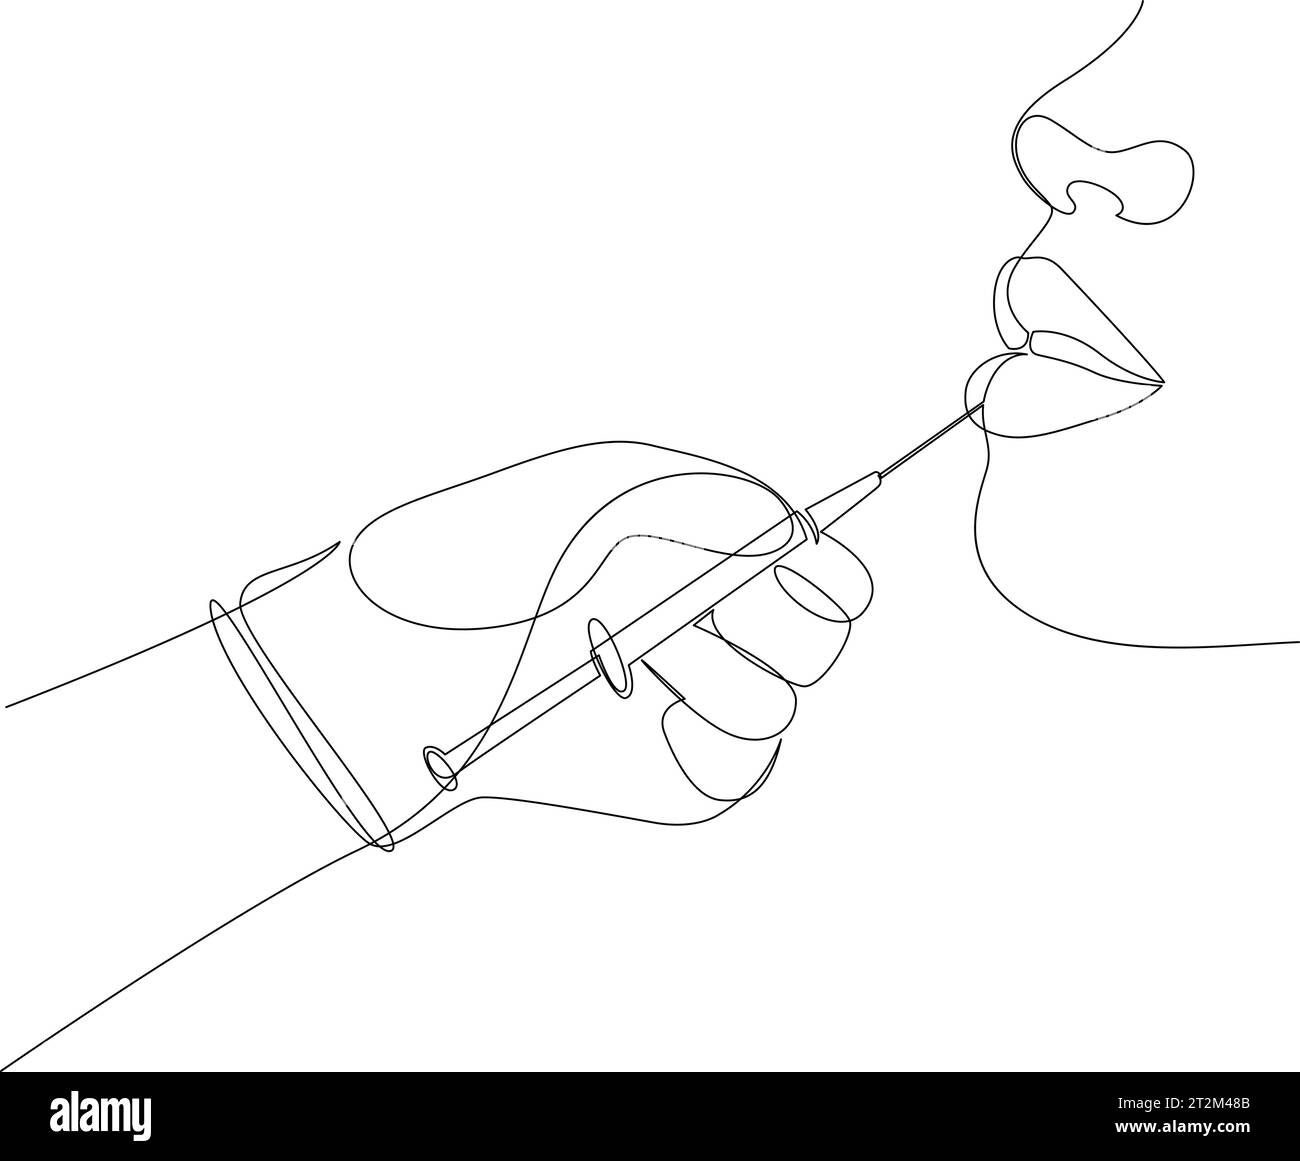 Continuous line drawing of beauty shot in lips. Gloved hand holding syringe for lip botox injection contour illustration. Beauty procedure concept Stock Vector